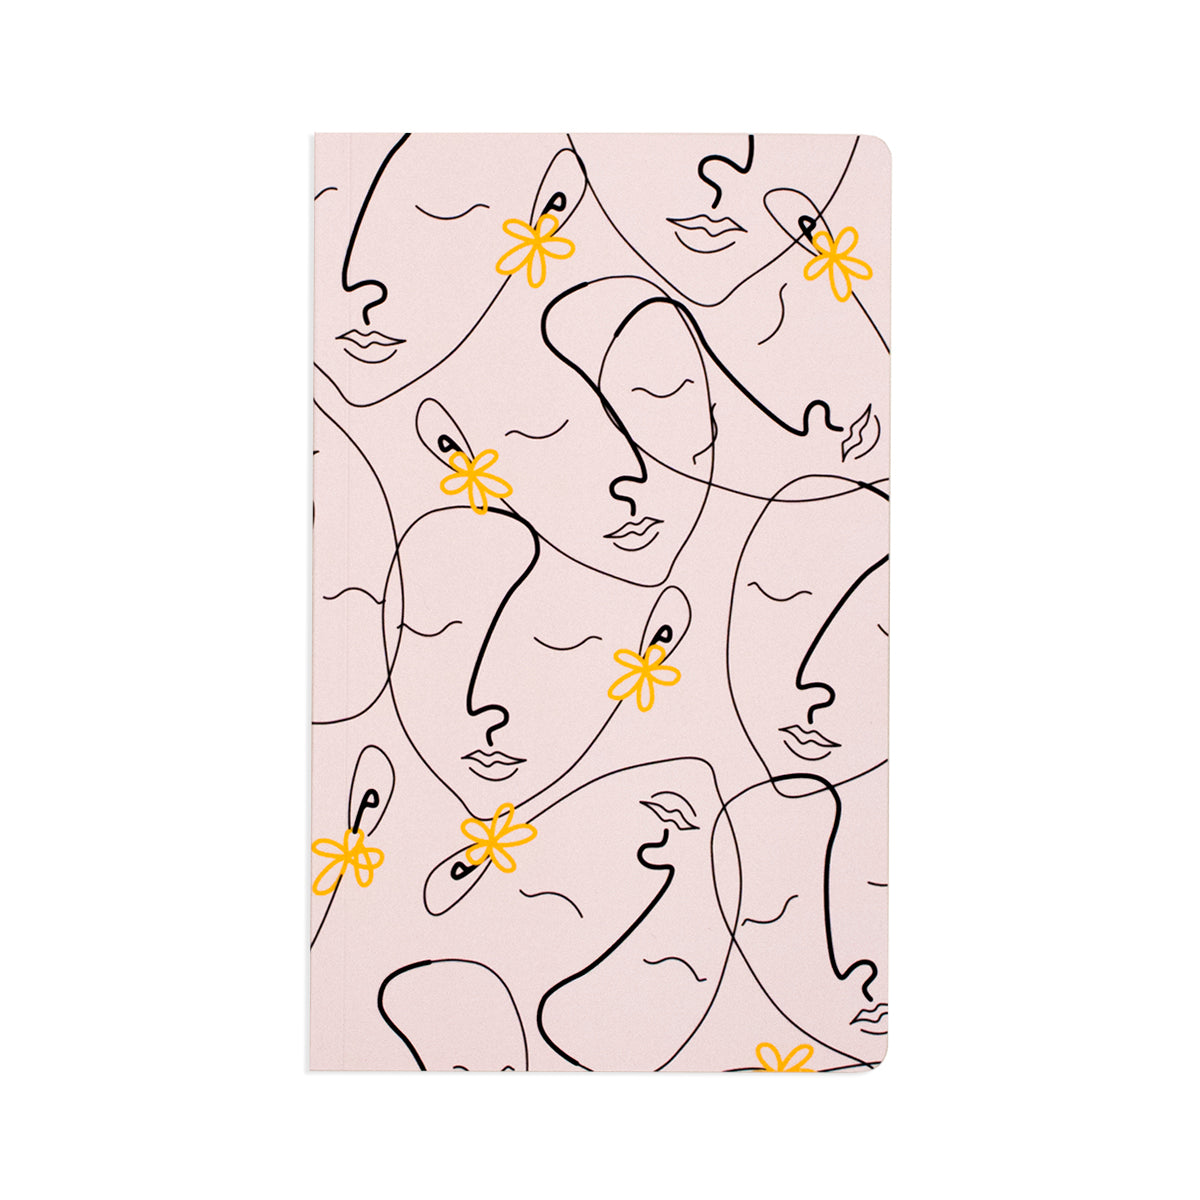 5" x 8.25" soft cover white notebook with thin black line art faces with yellow flower earrings pattern